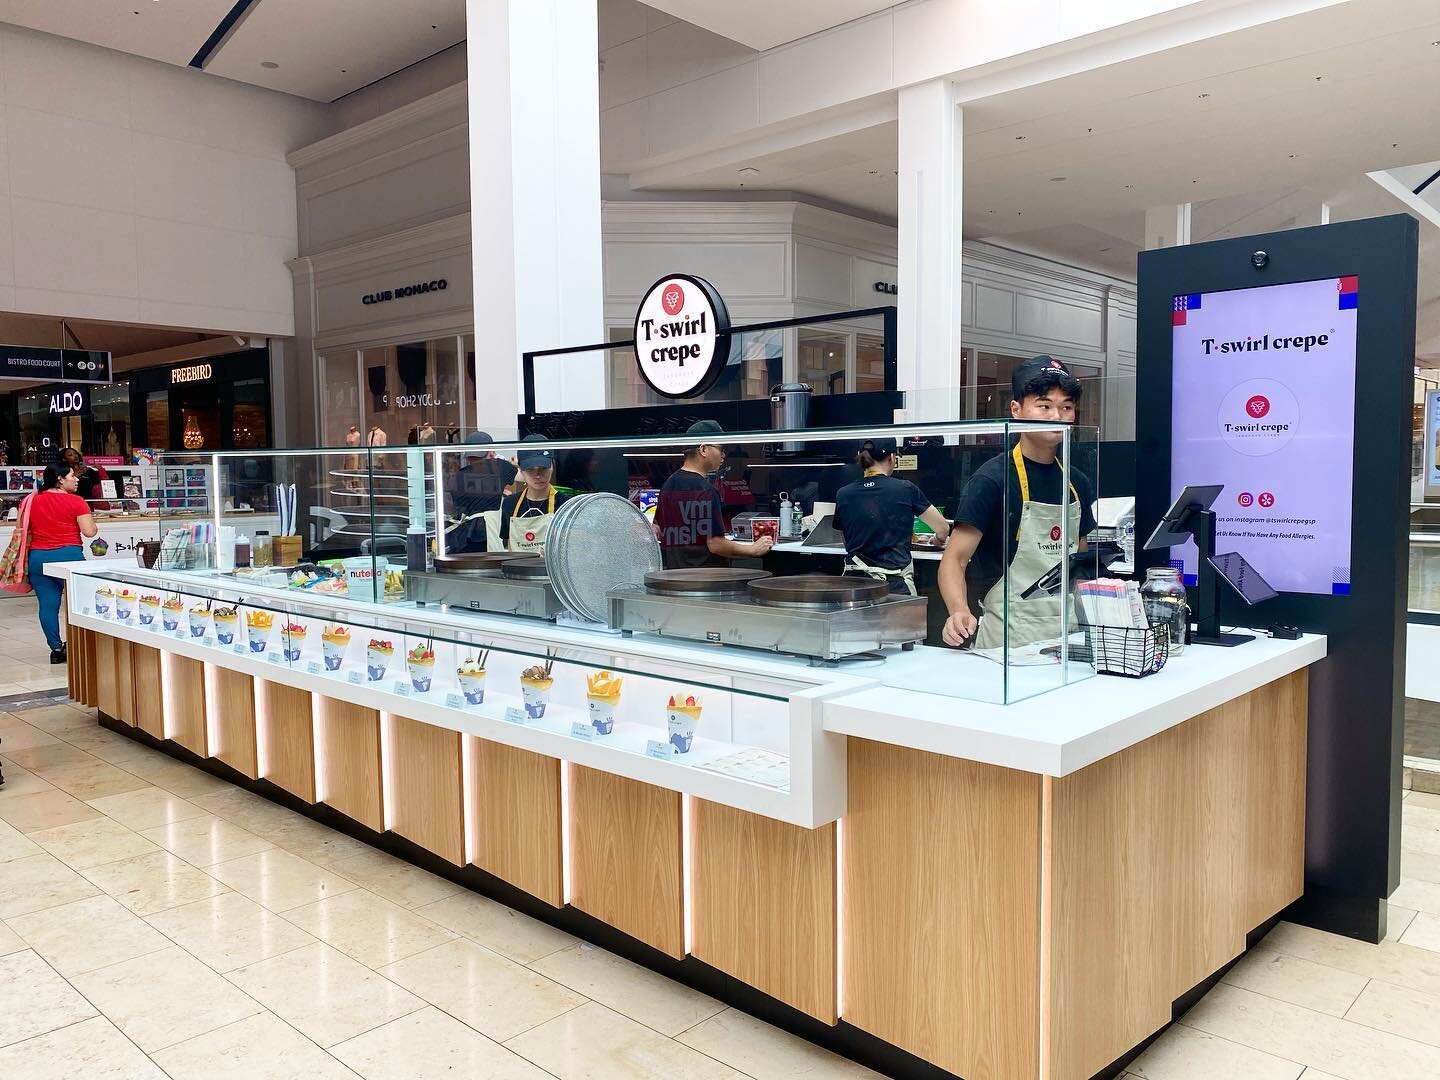 Kiosk for @tswirlcrepe at @gsplaza now up and running